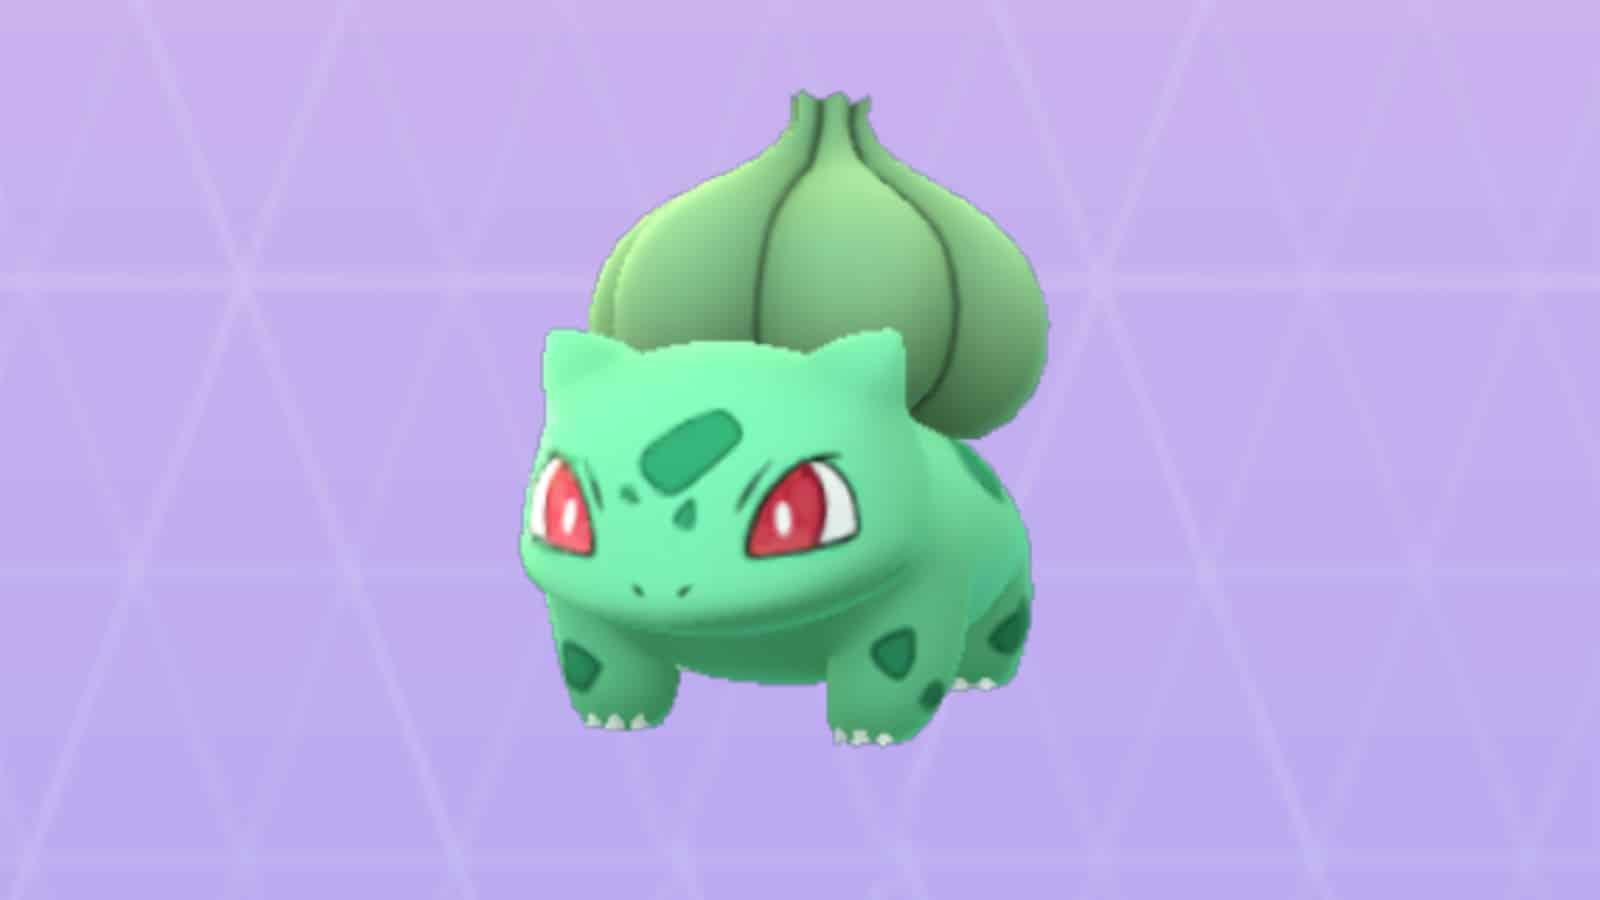 I caught 21 shiny Bulbasaur during the 3 hour community day today